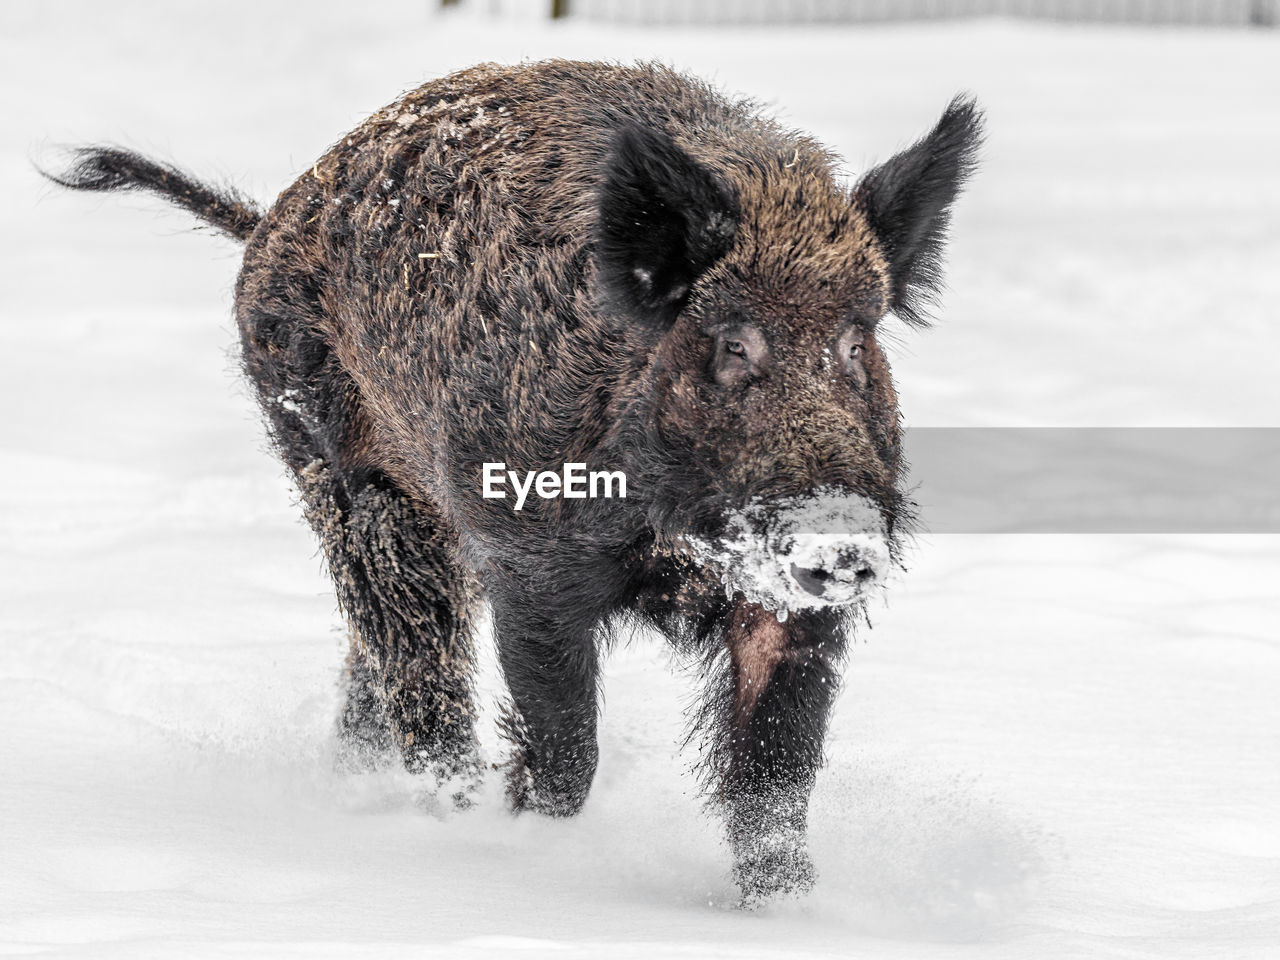 Close-up of a wild boar walking on snow